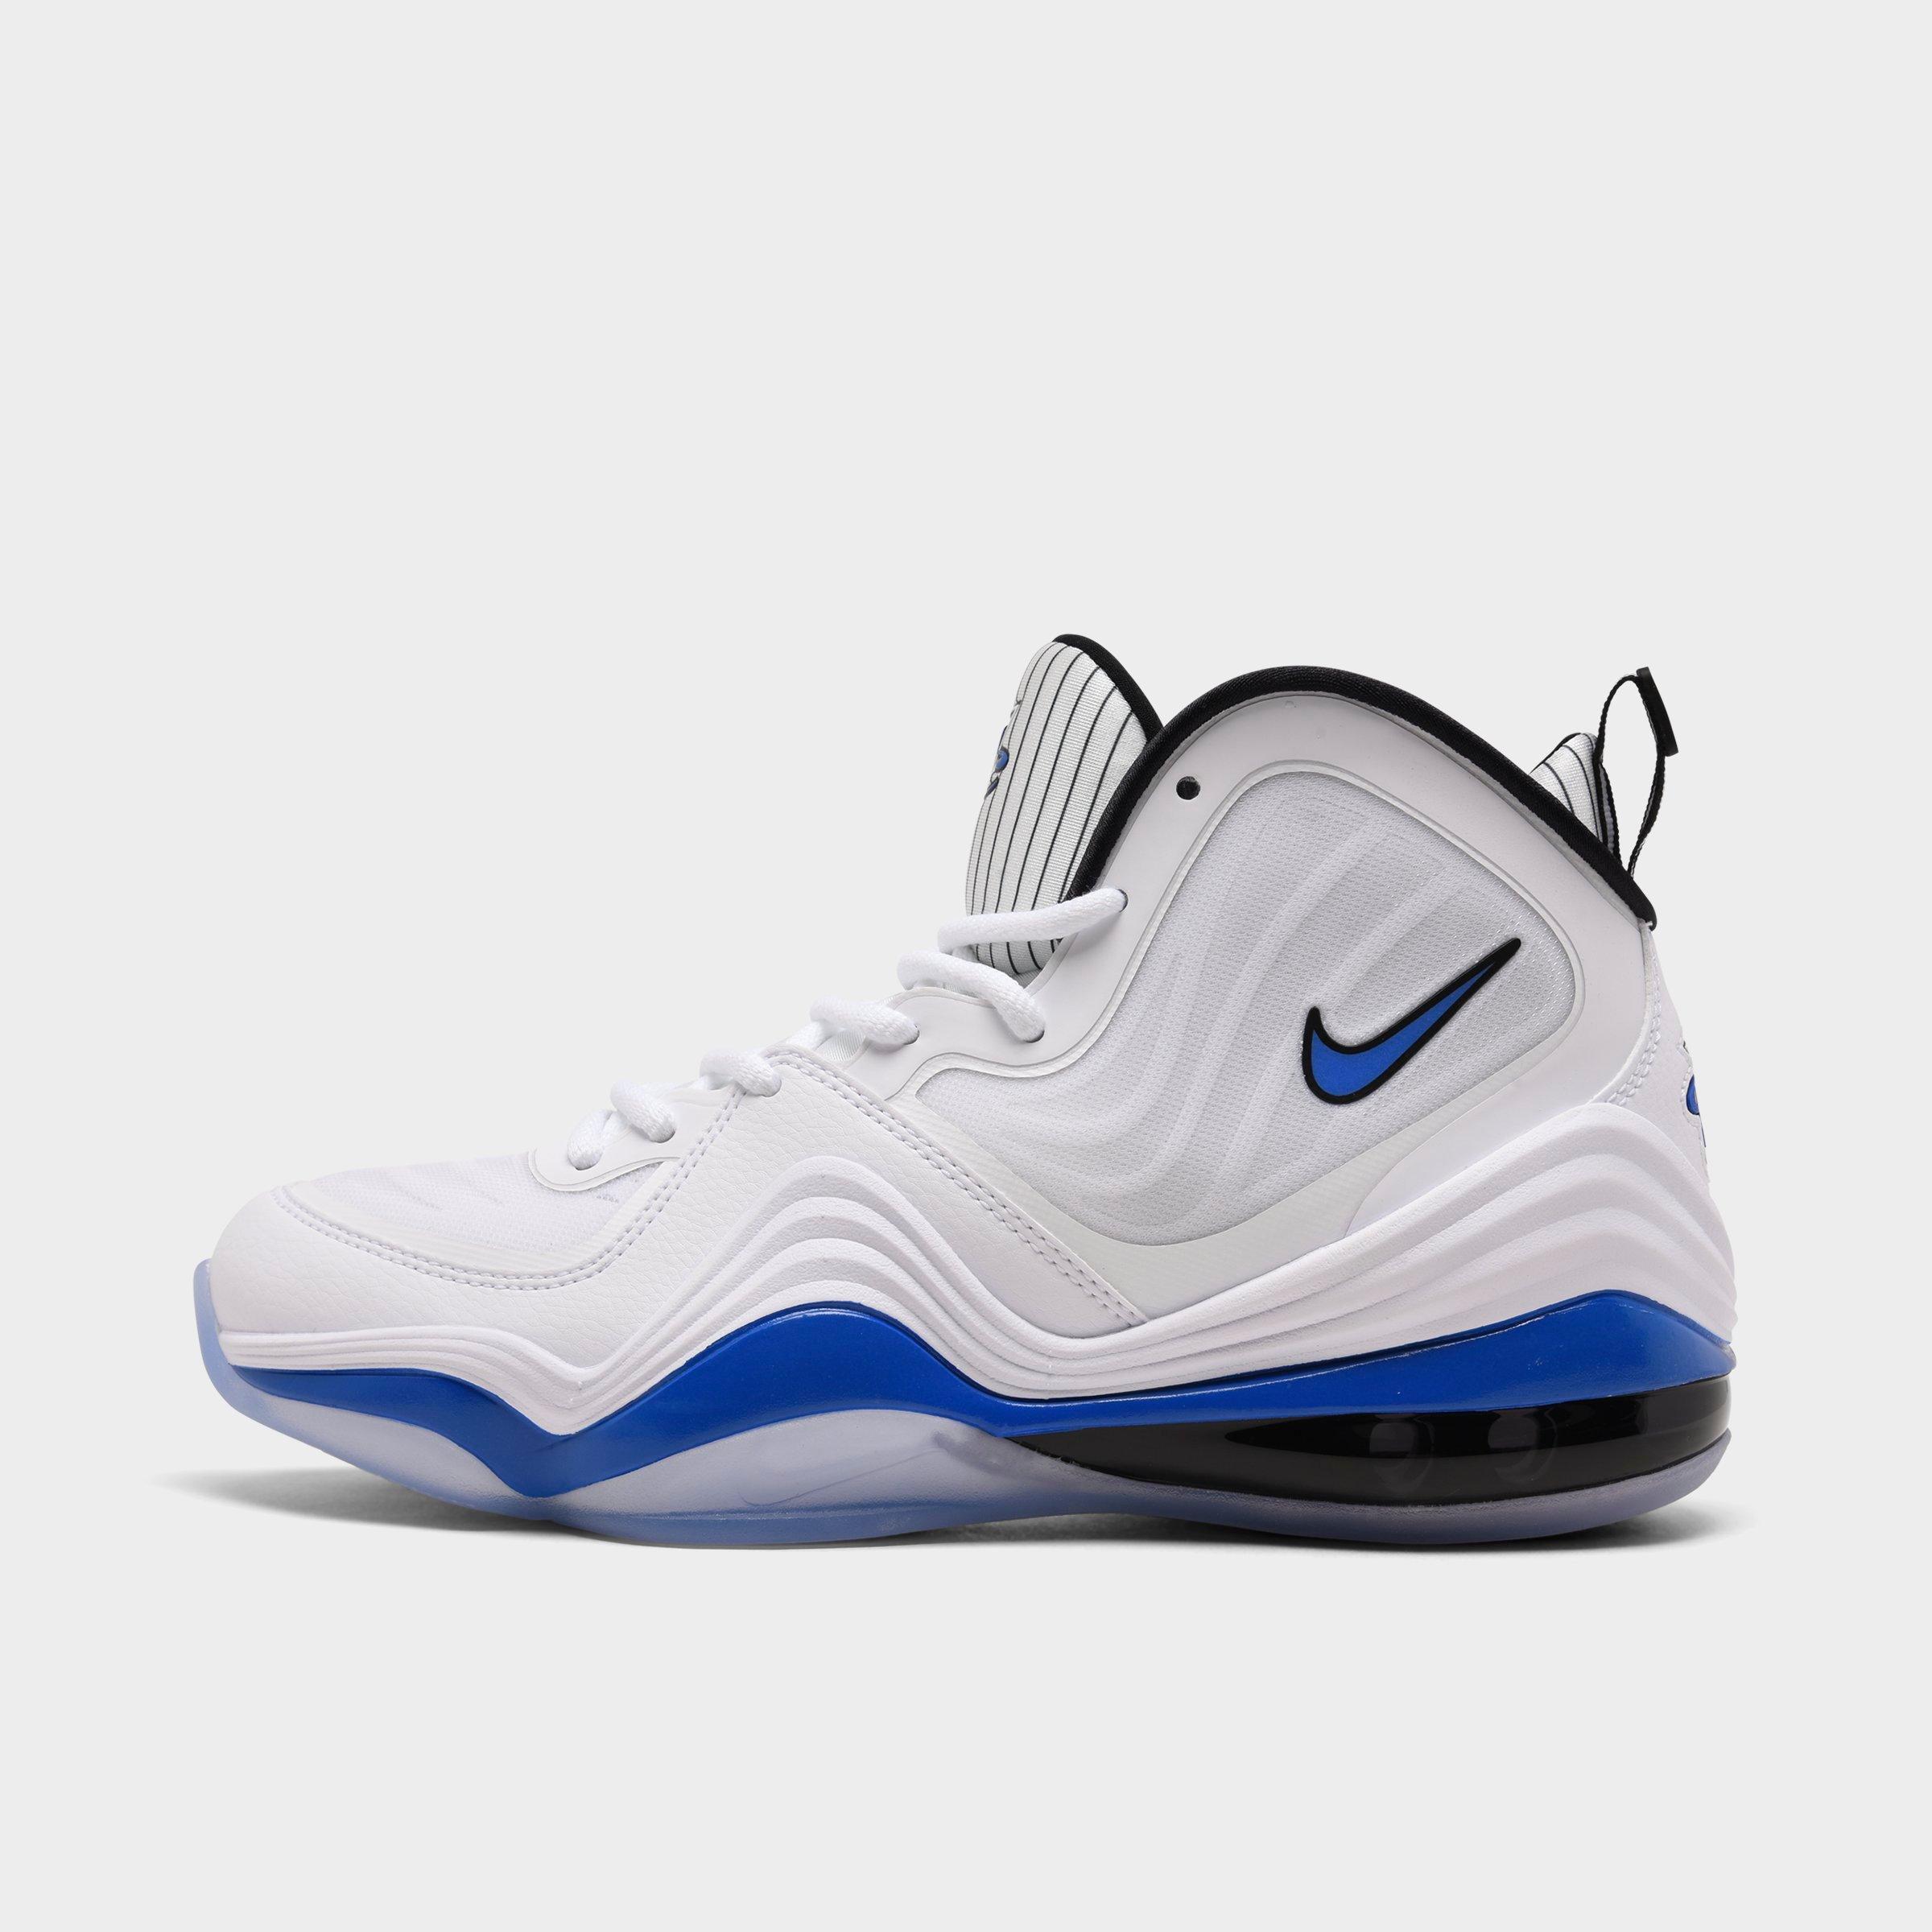 Nike Air Penny 5 Basketball Shoes| JD 